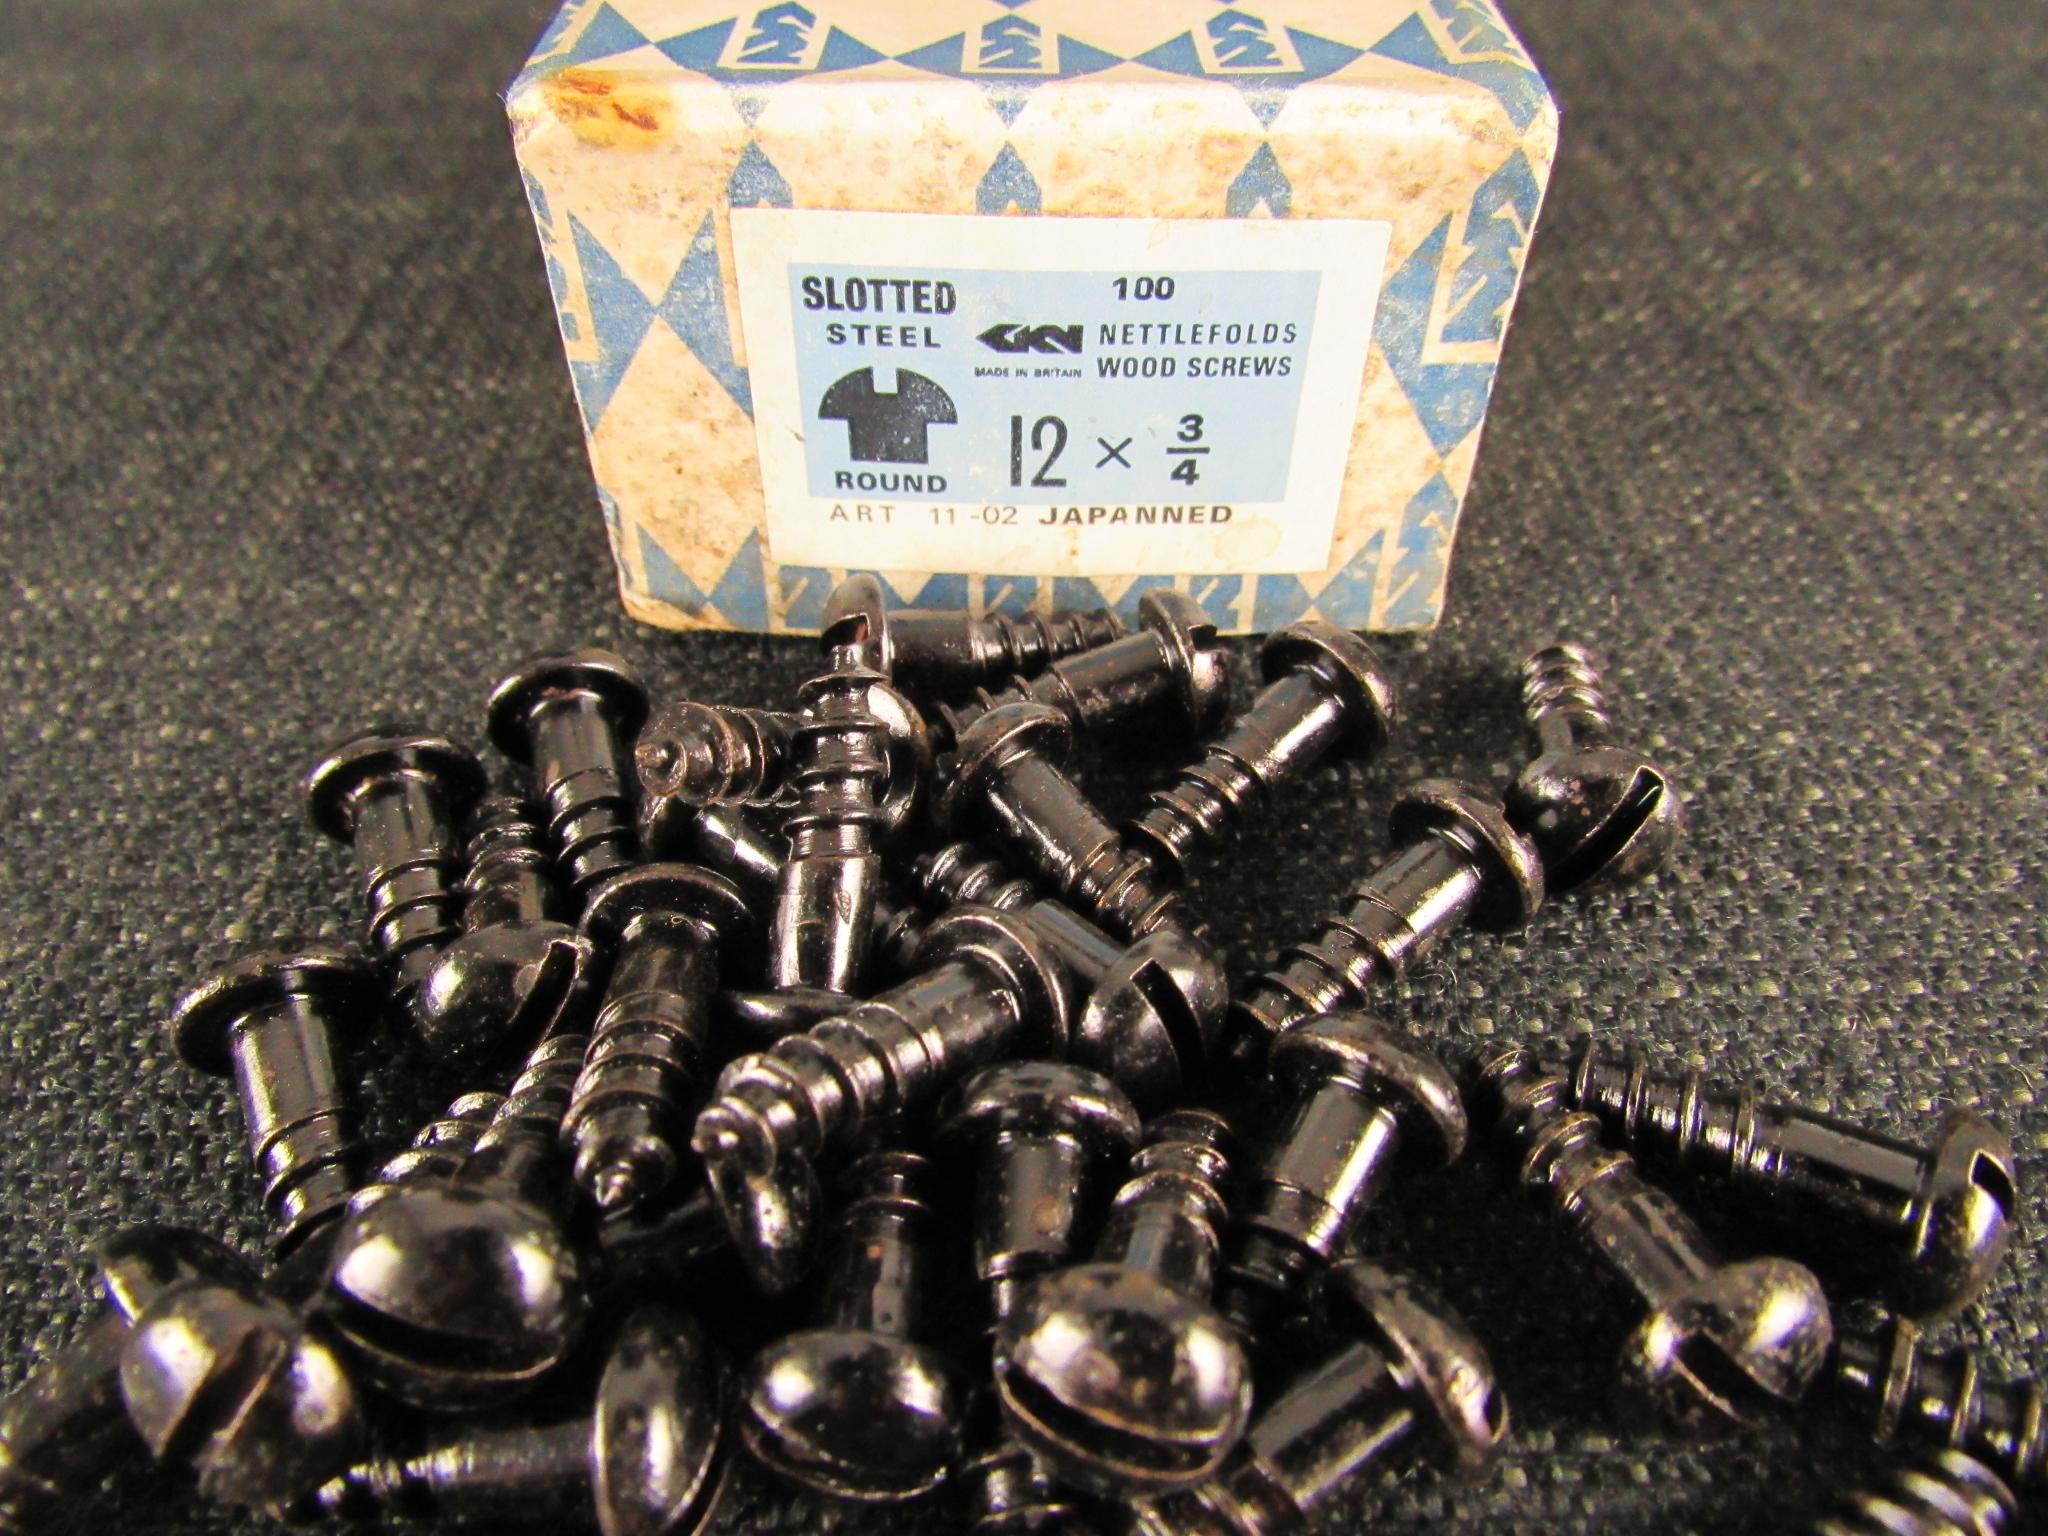 NETTLEFOLDS 12 x 3/4 Slotted Steel Round Japanned Screws (Qty 25)